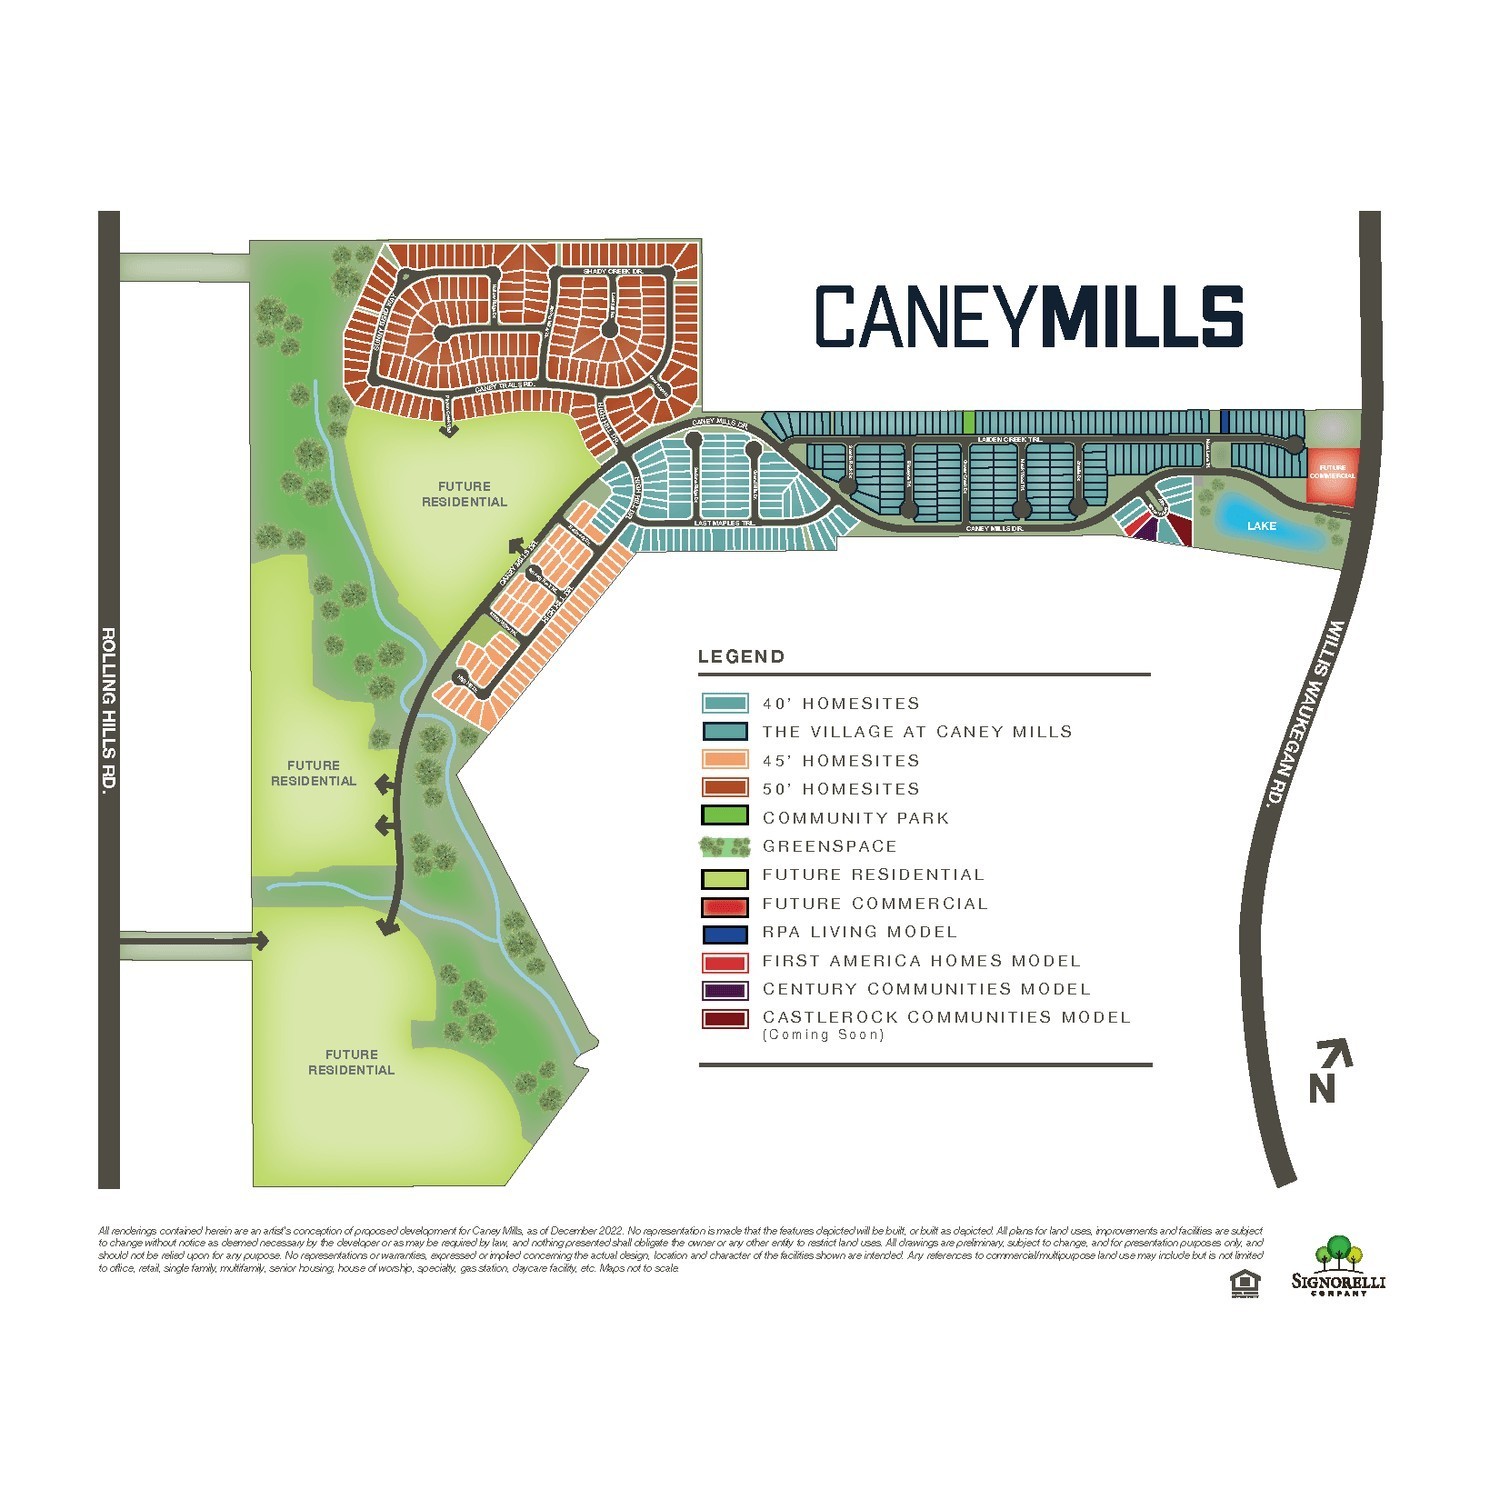 32. Caney Mills By Castlerock Communities 13019 Stone Valley Way